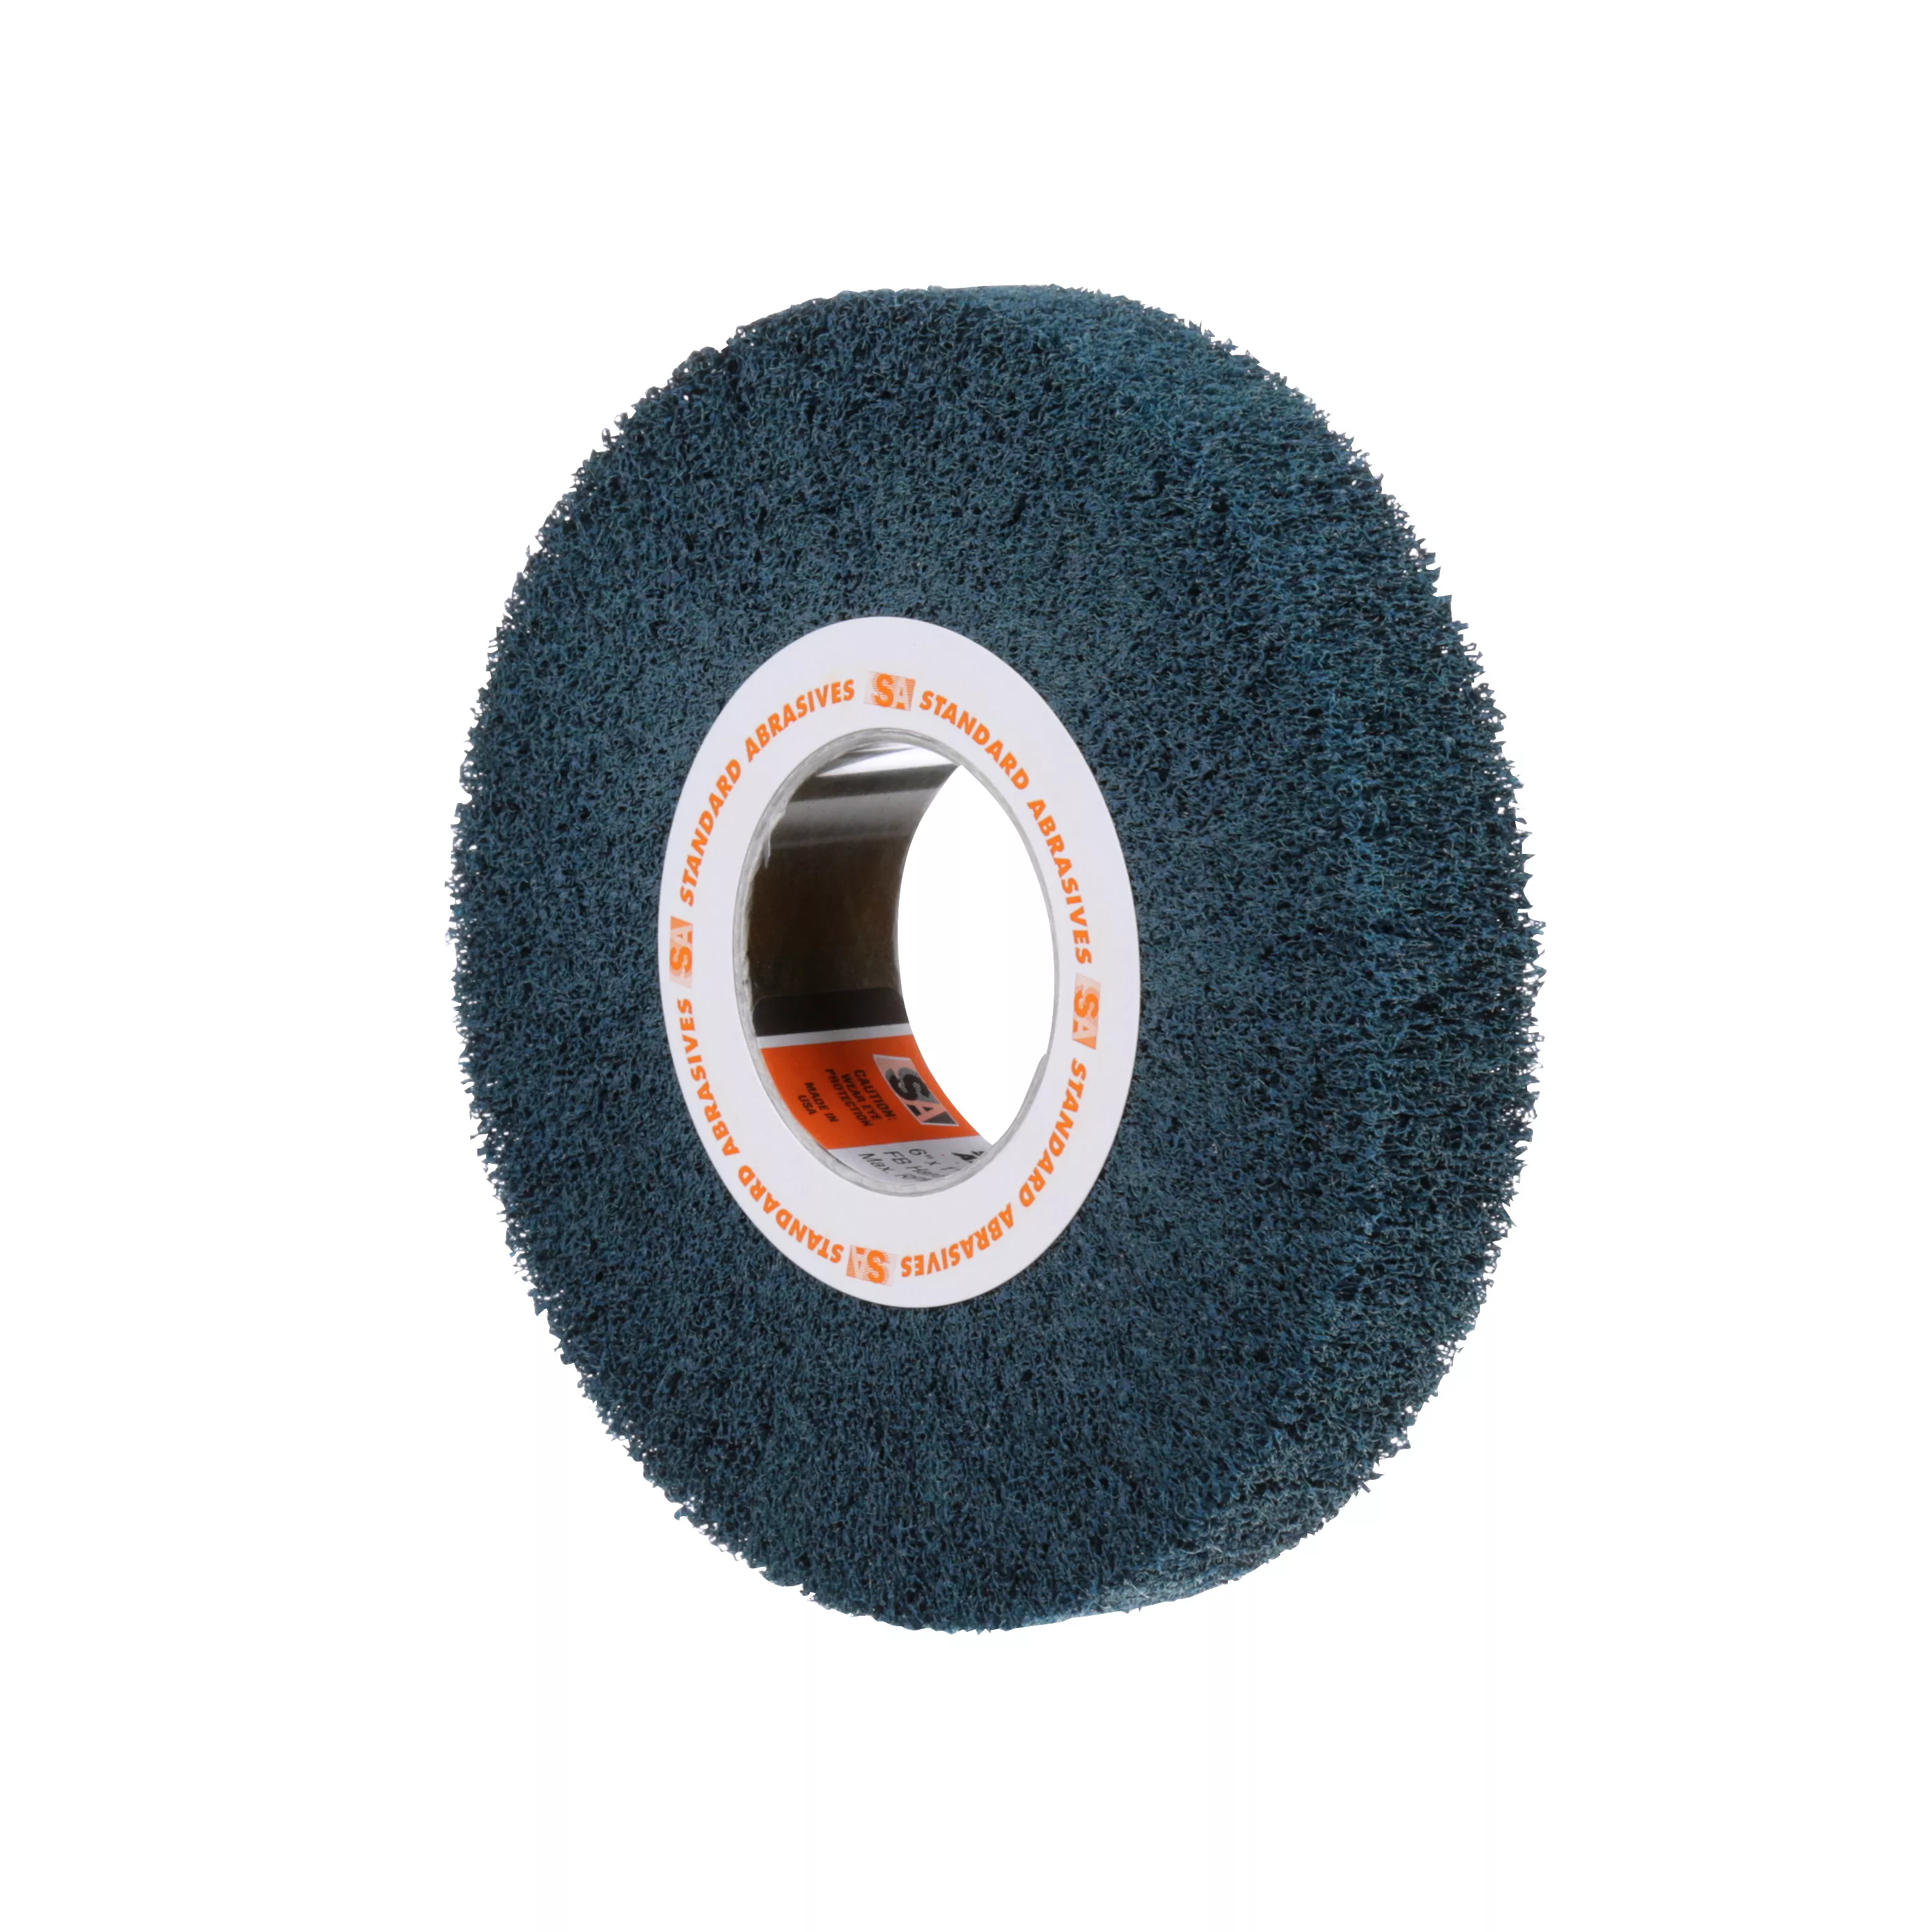 Product Number 875139 | Standard Abrasives™ Buff and Blend HS Flap Brush 875139